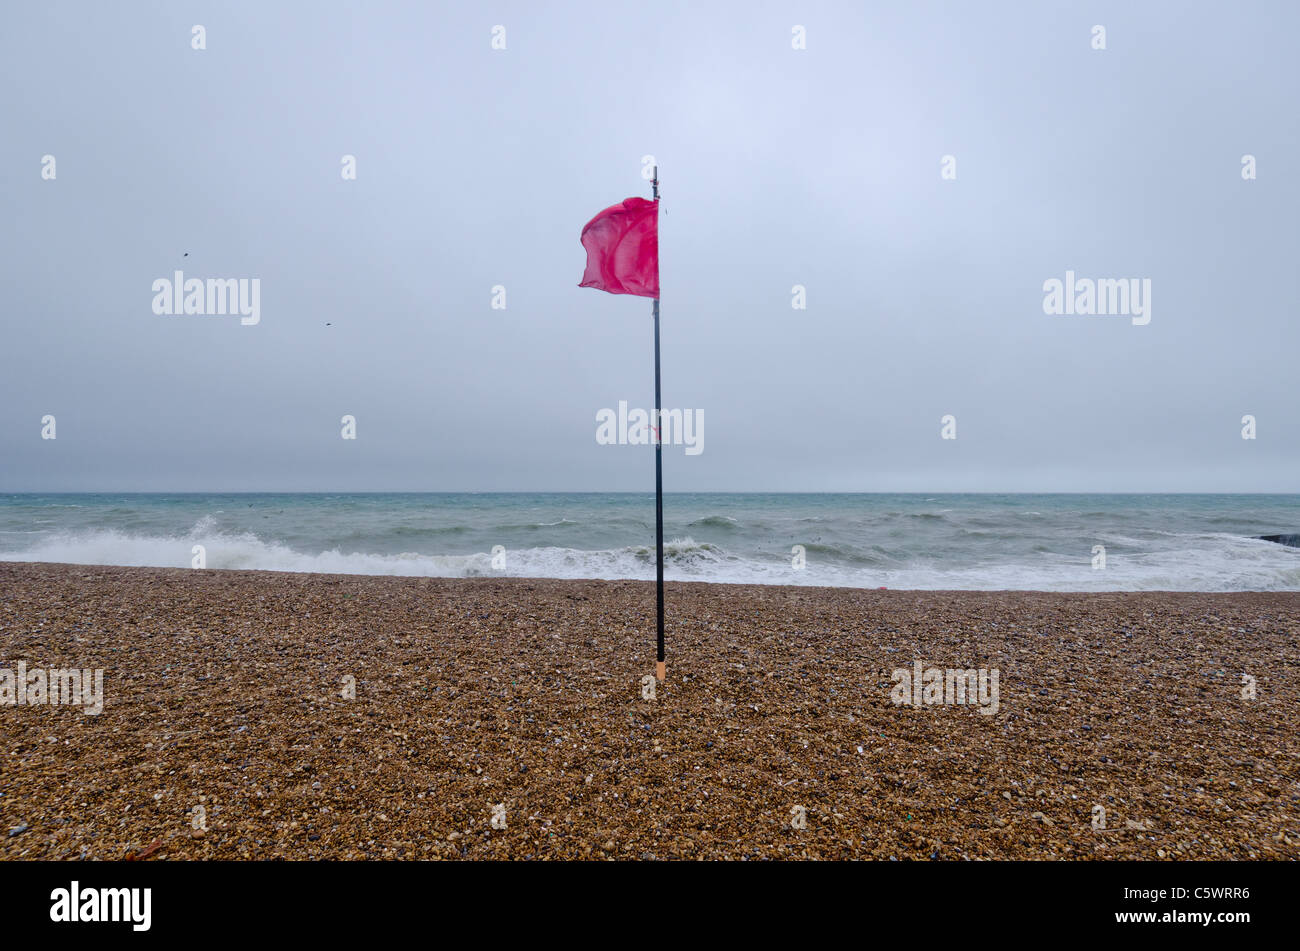 A man braves the stormy weather at Saltdean, ast East Sussex, promenade, as waves hit the breakwater. Stock Photo